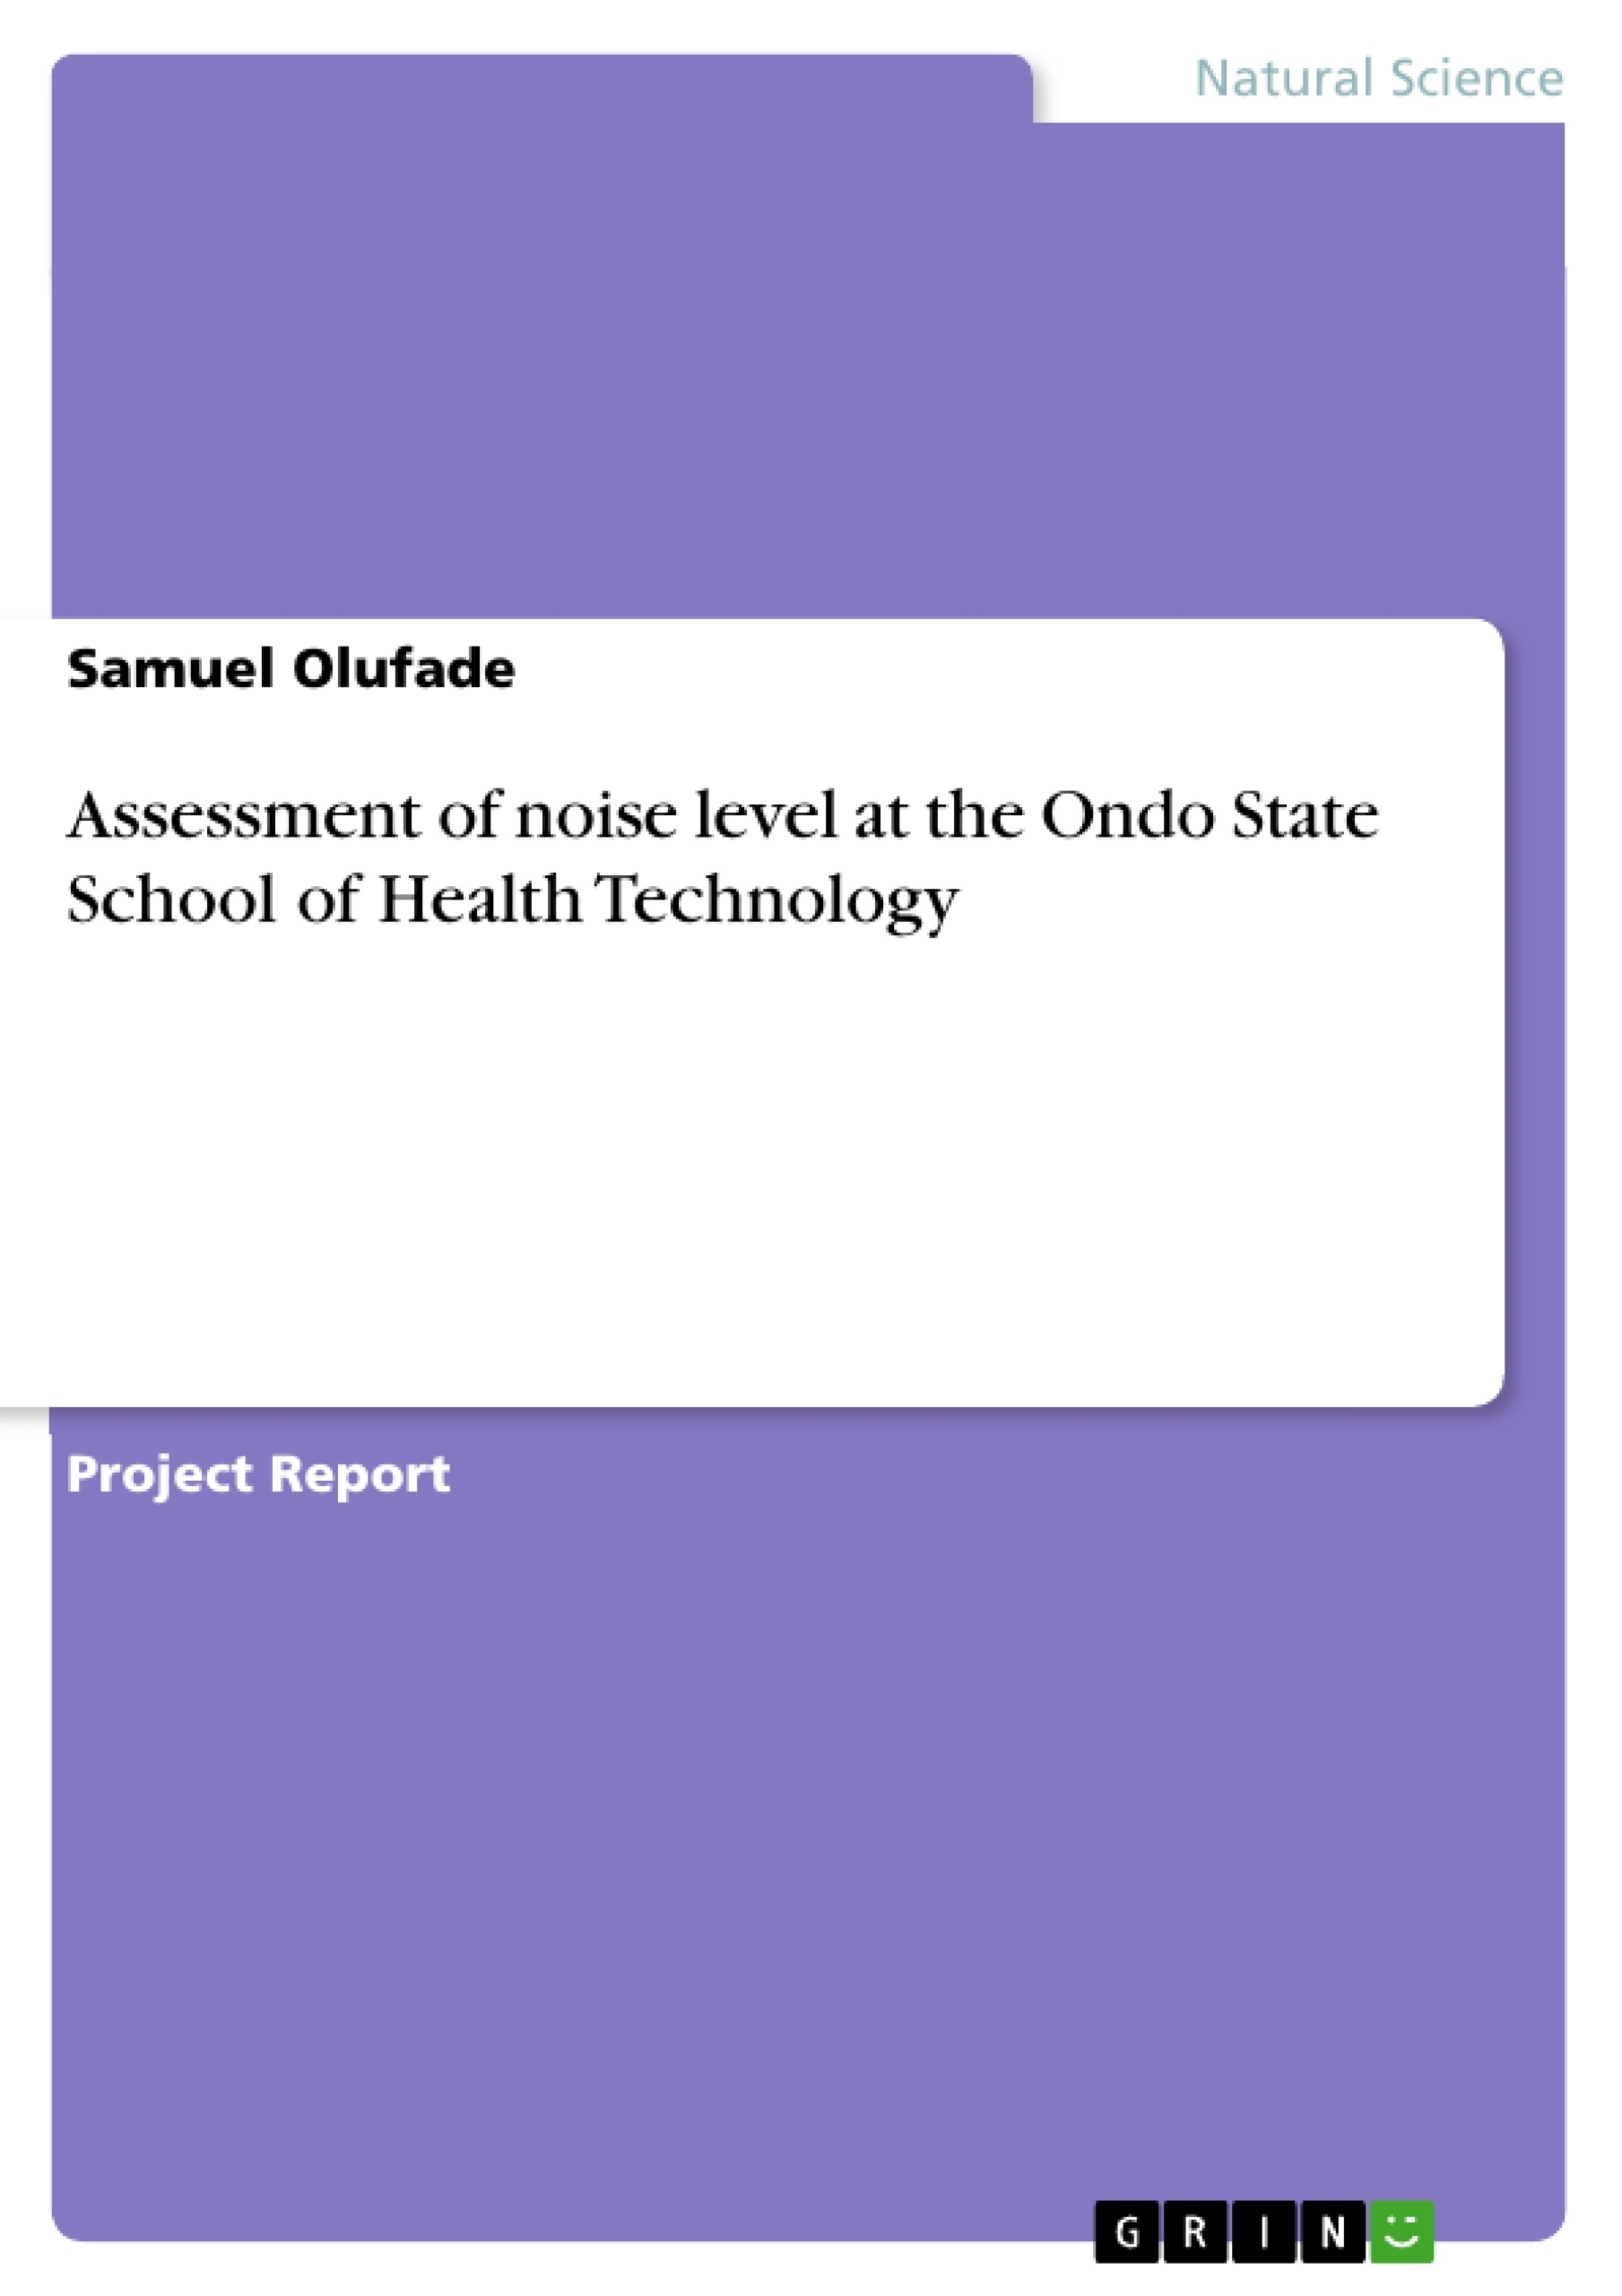 Titel: Assessment of noise level at the Ondo State School of Health Technology